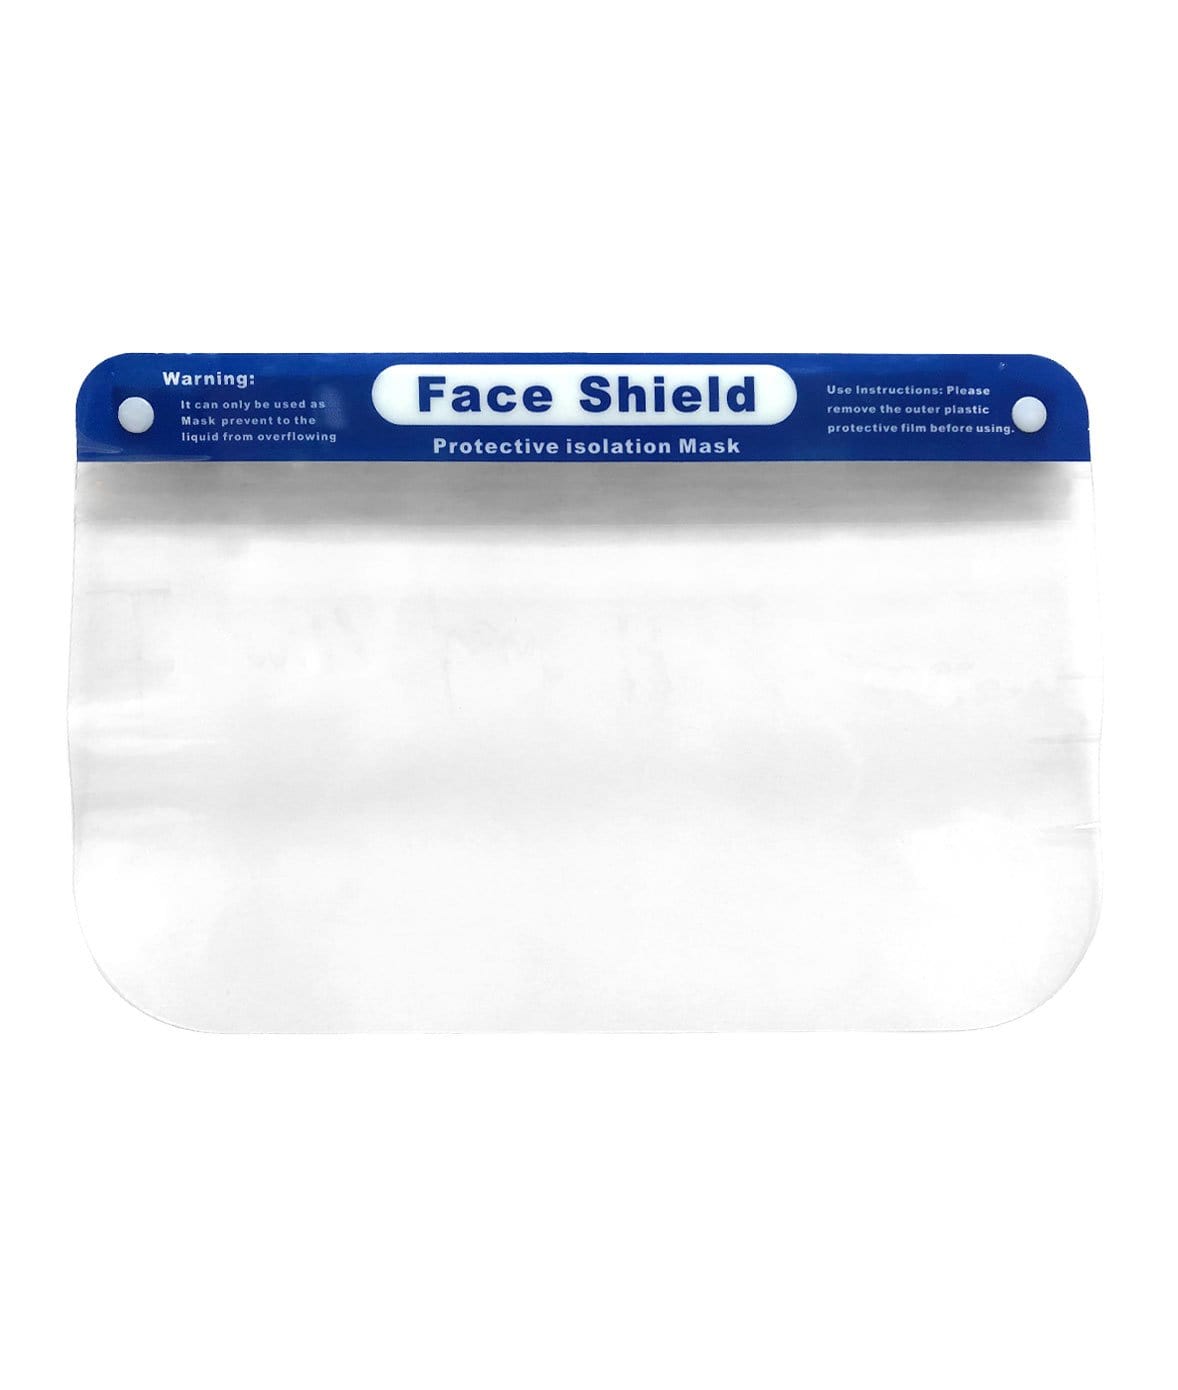 Nayked Apparel Unisex Comfort Face Shield with Elastic, Single NAY-MSK